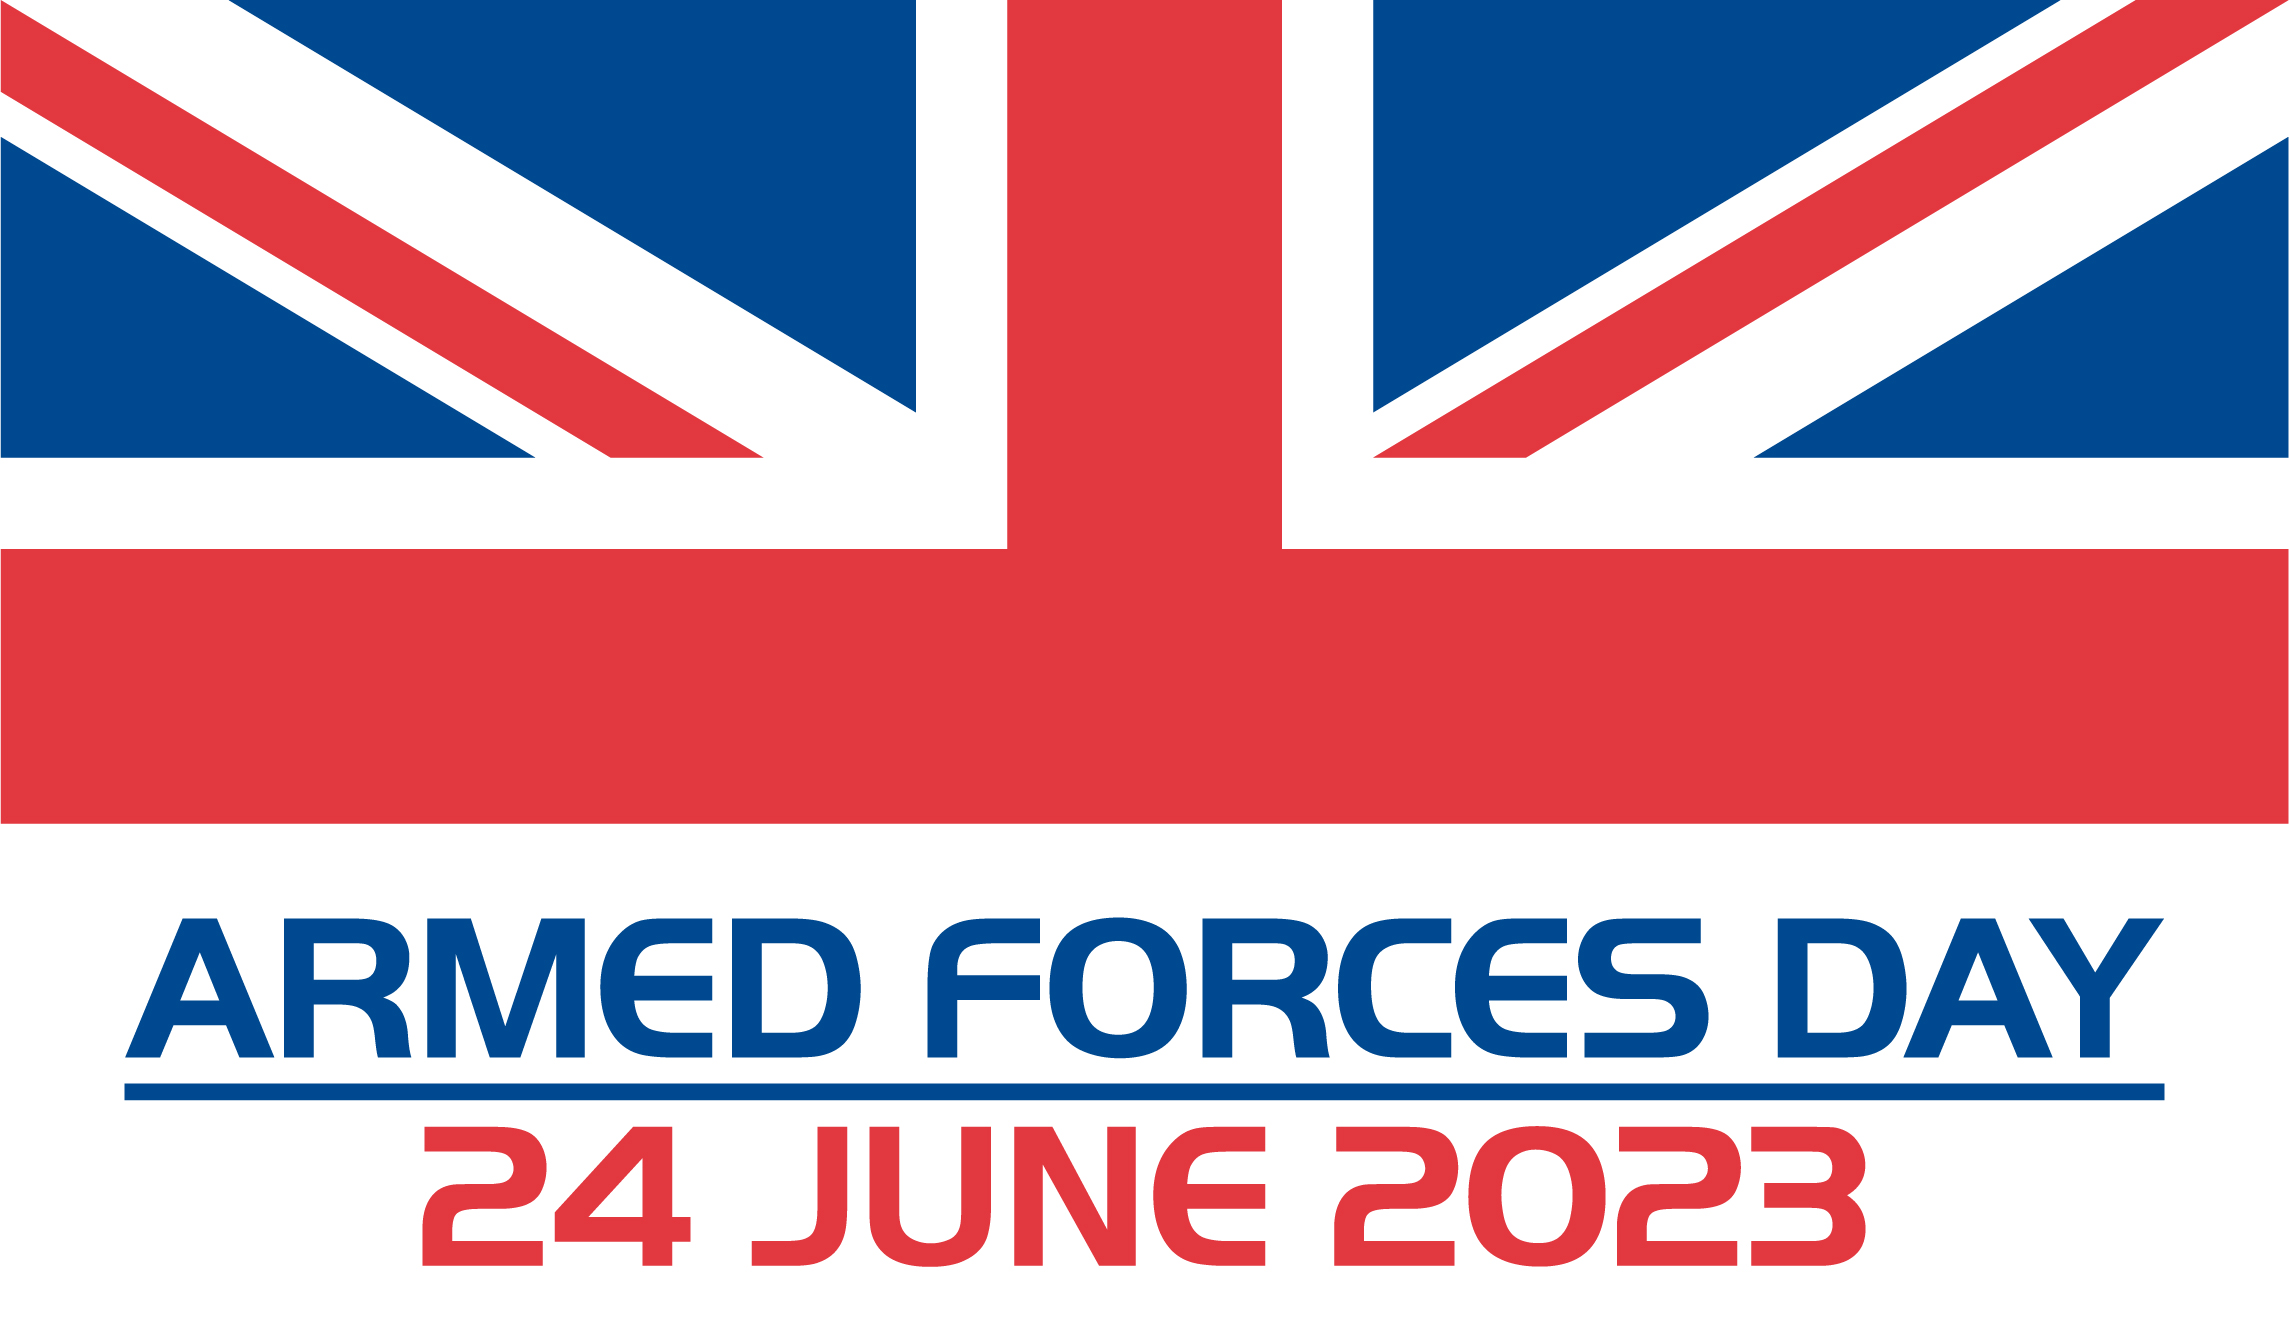 You are not alone - support is available for the Armed Forces community